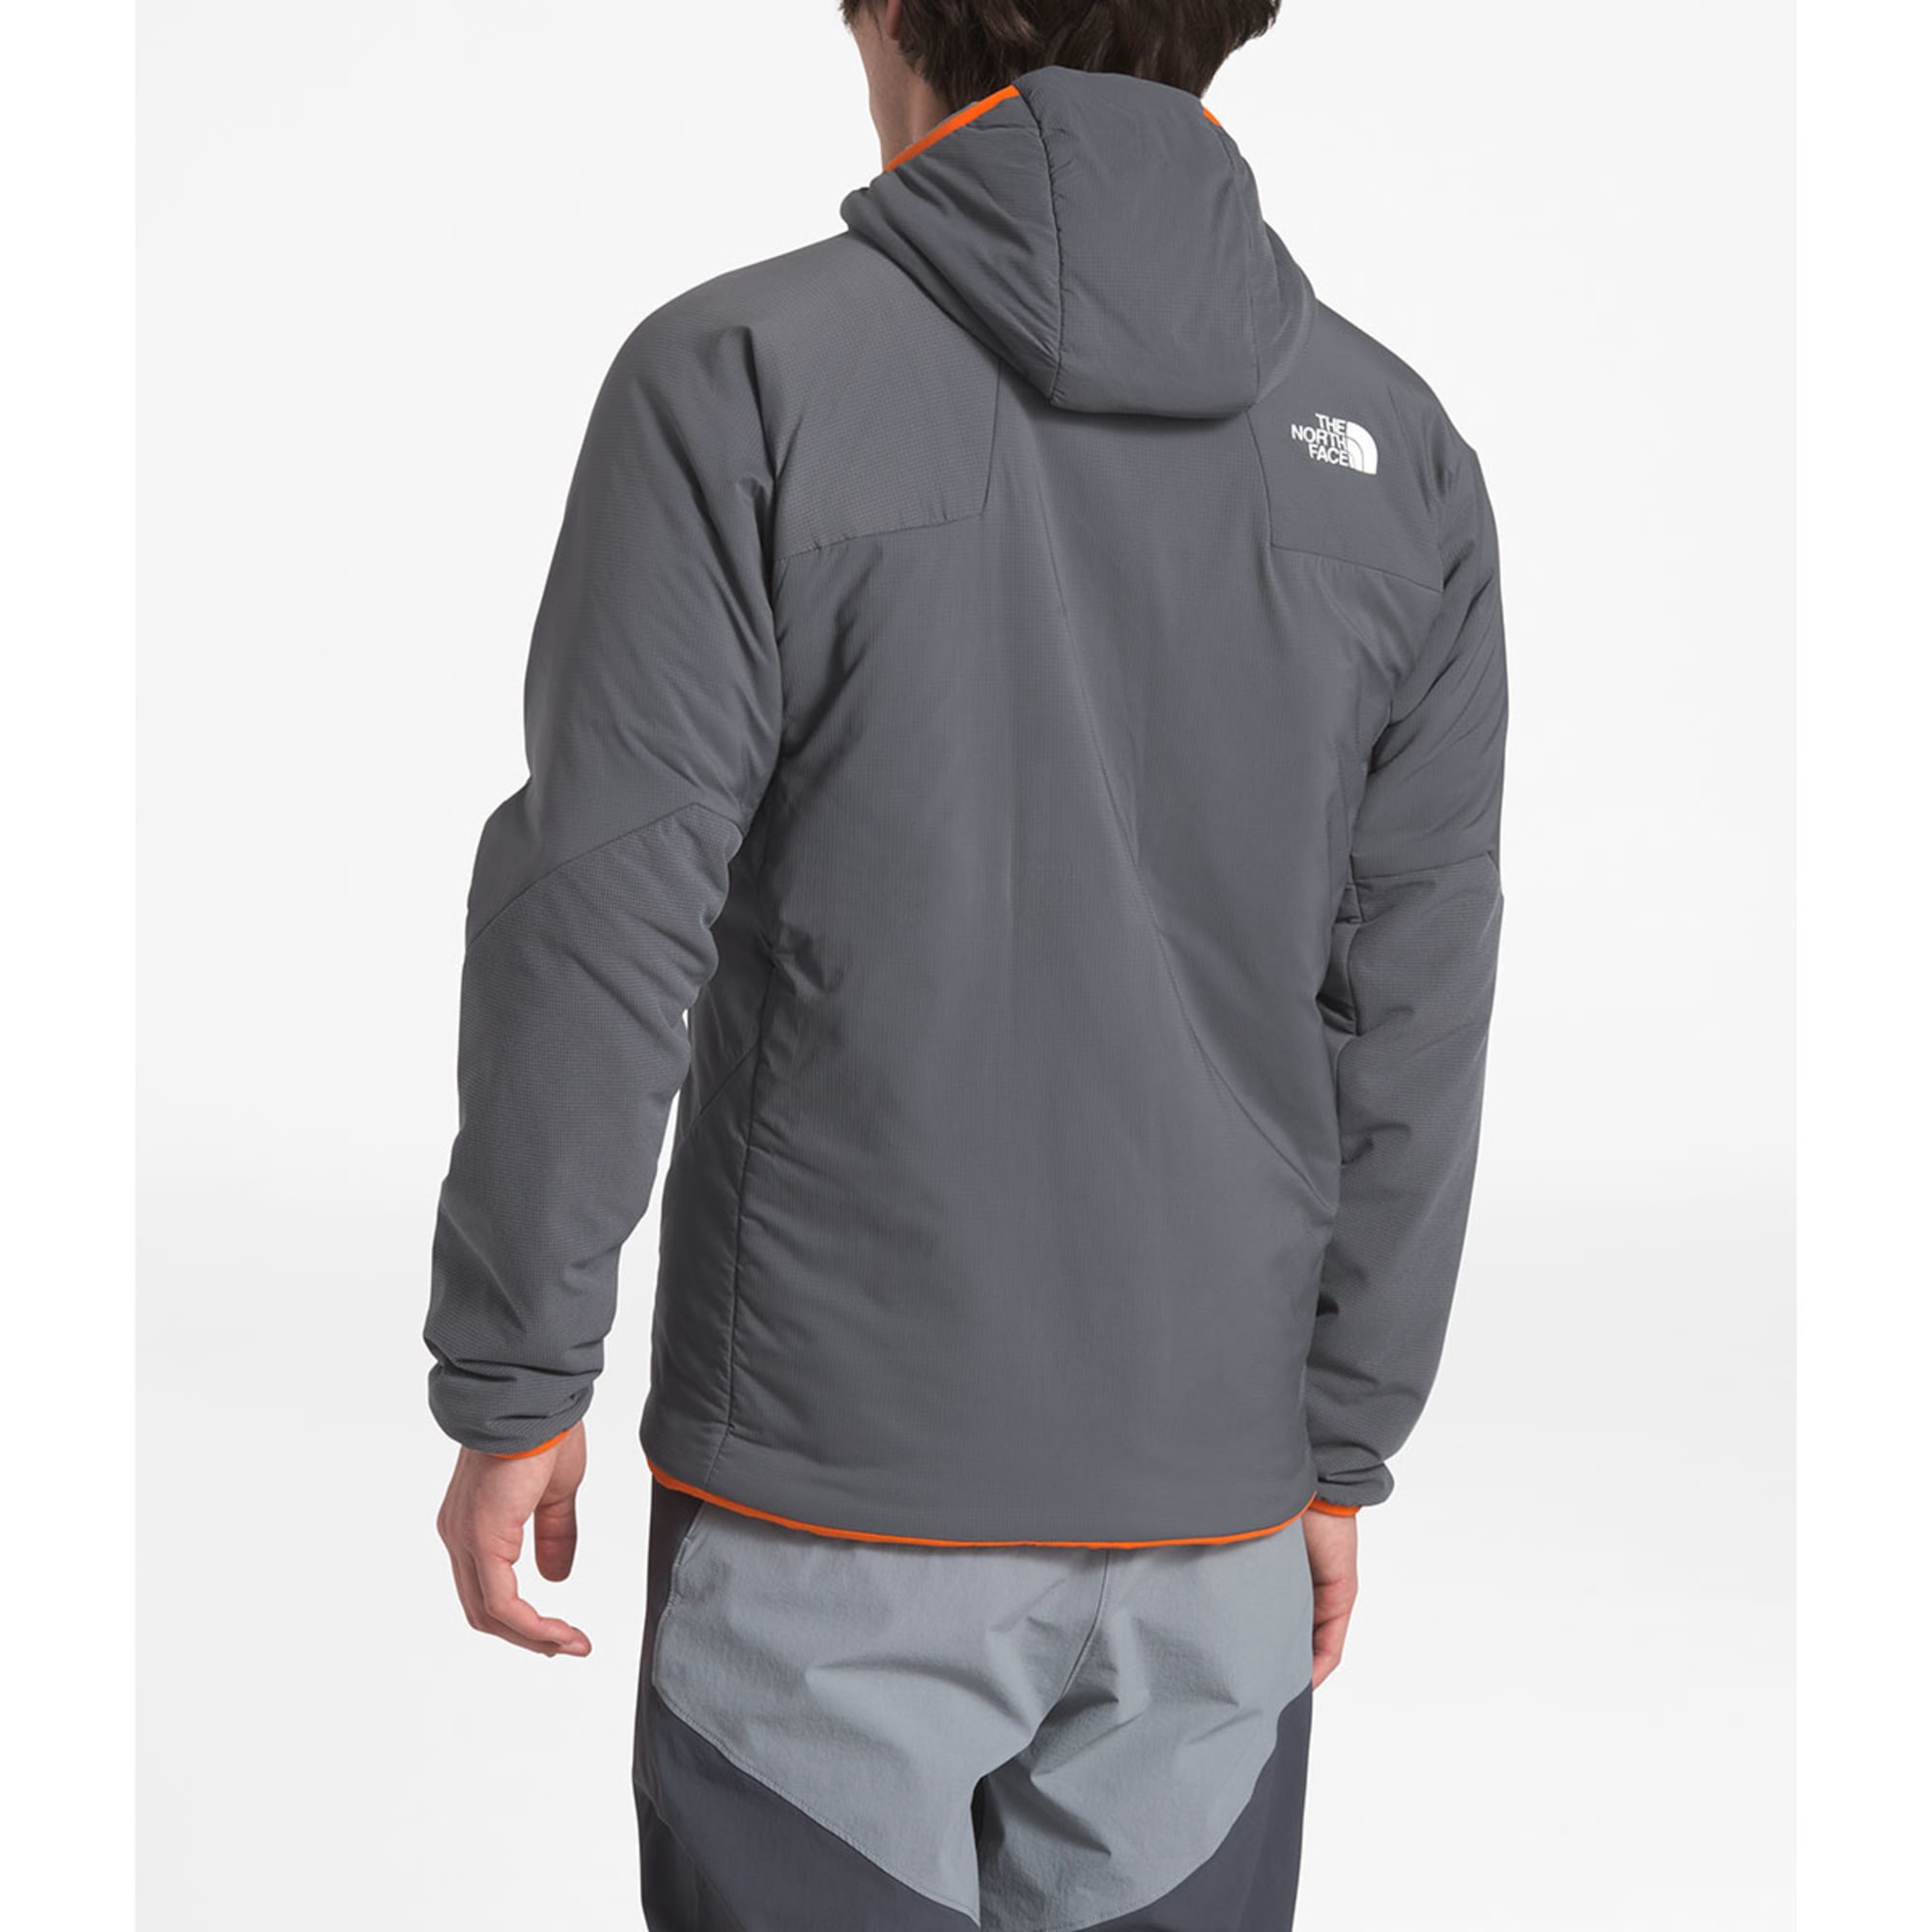 THE NORTH FACE Men's Ventrix Hoodie Jacket - Eastern Mountain Sports